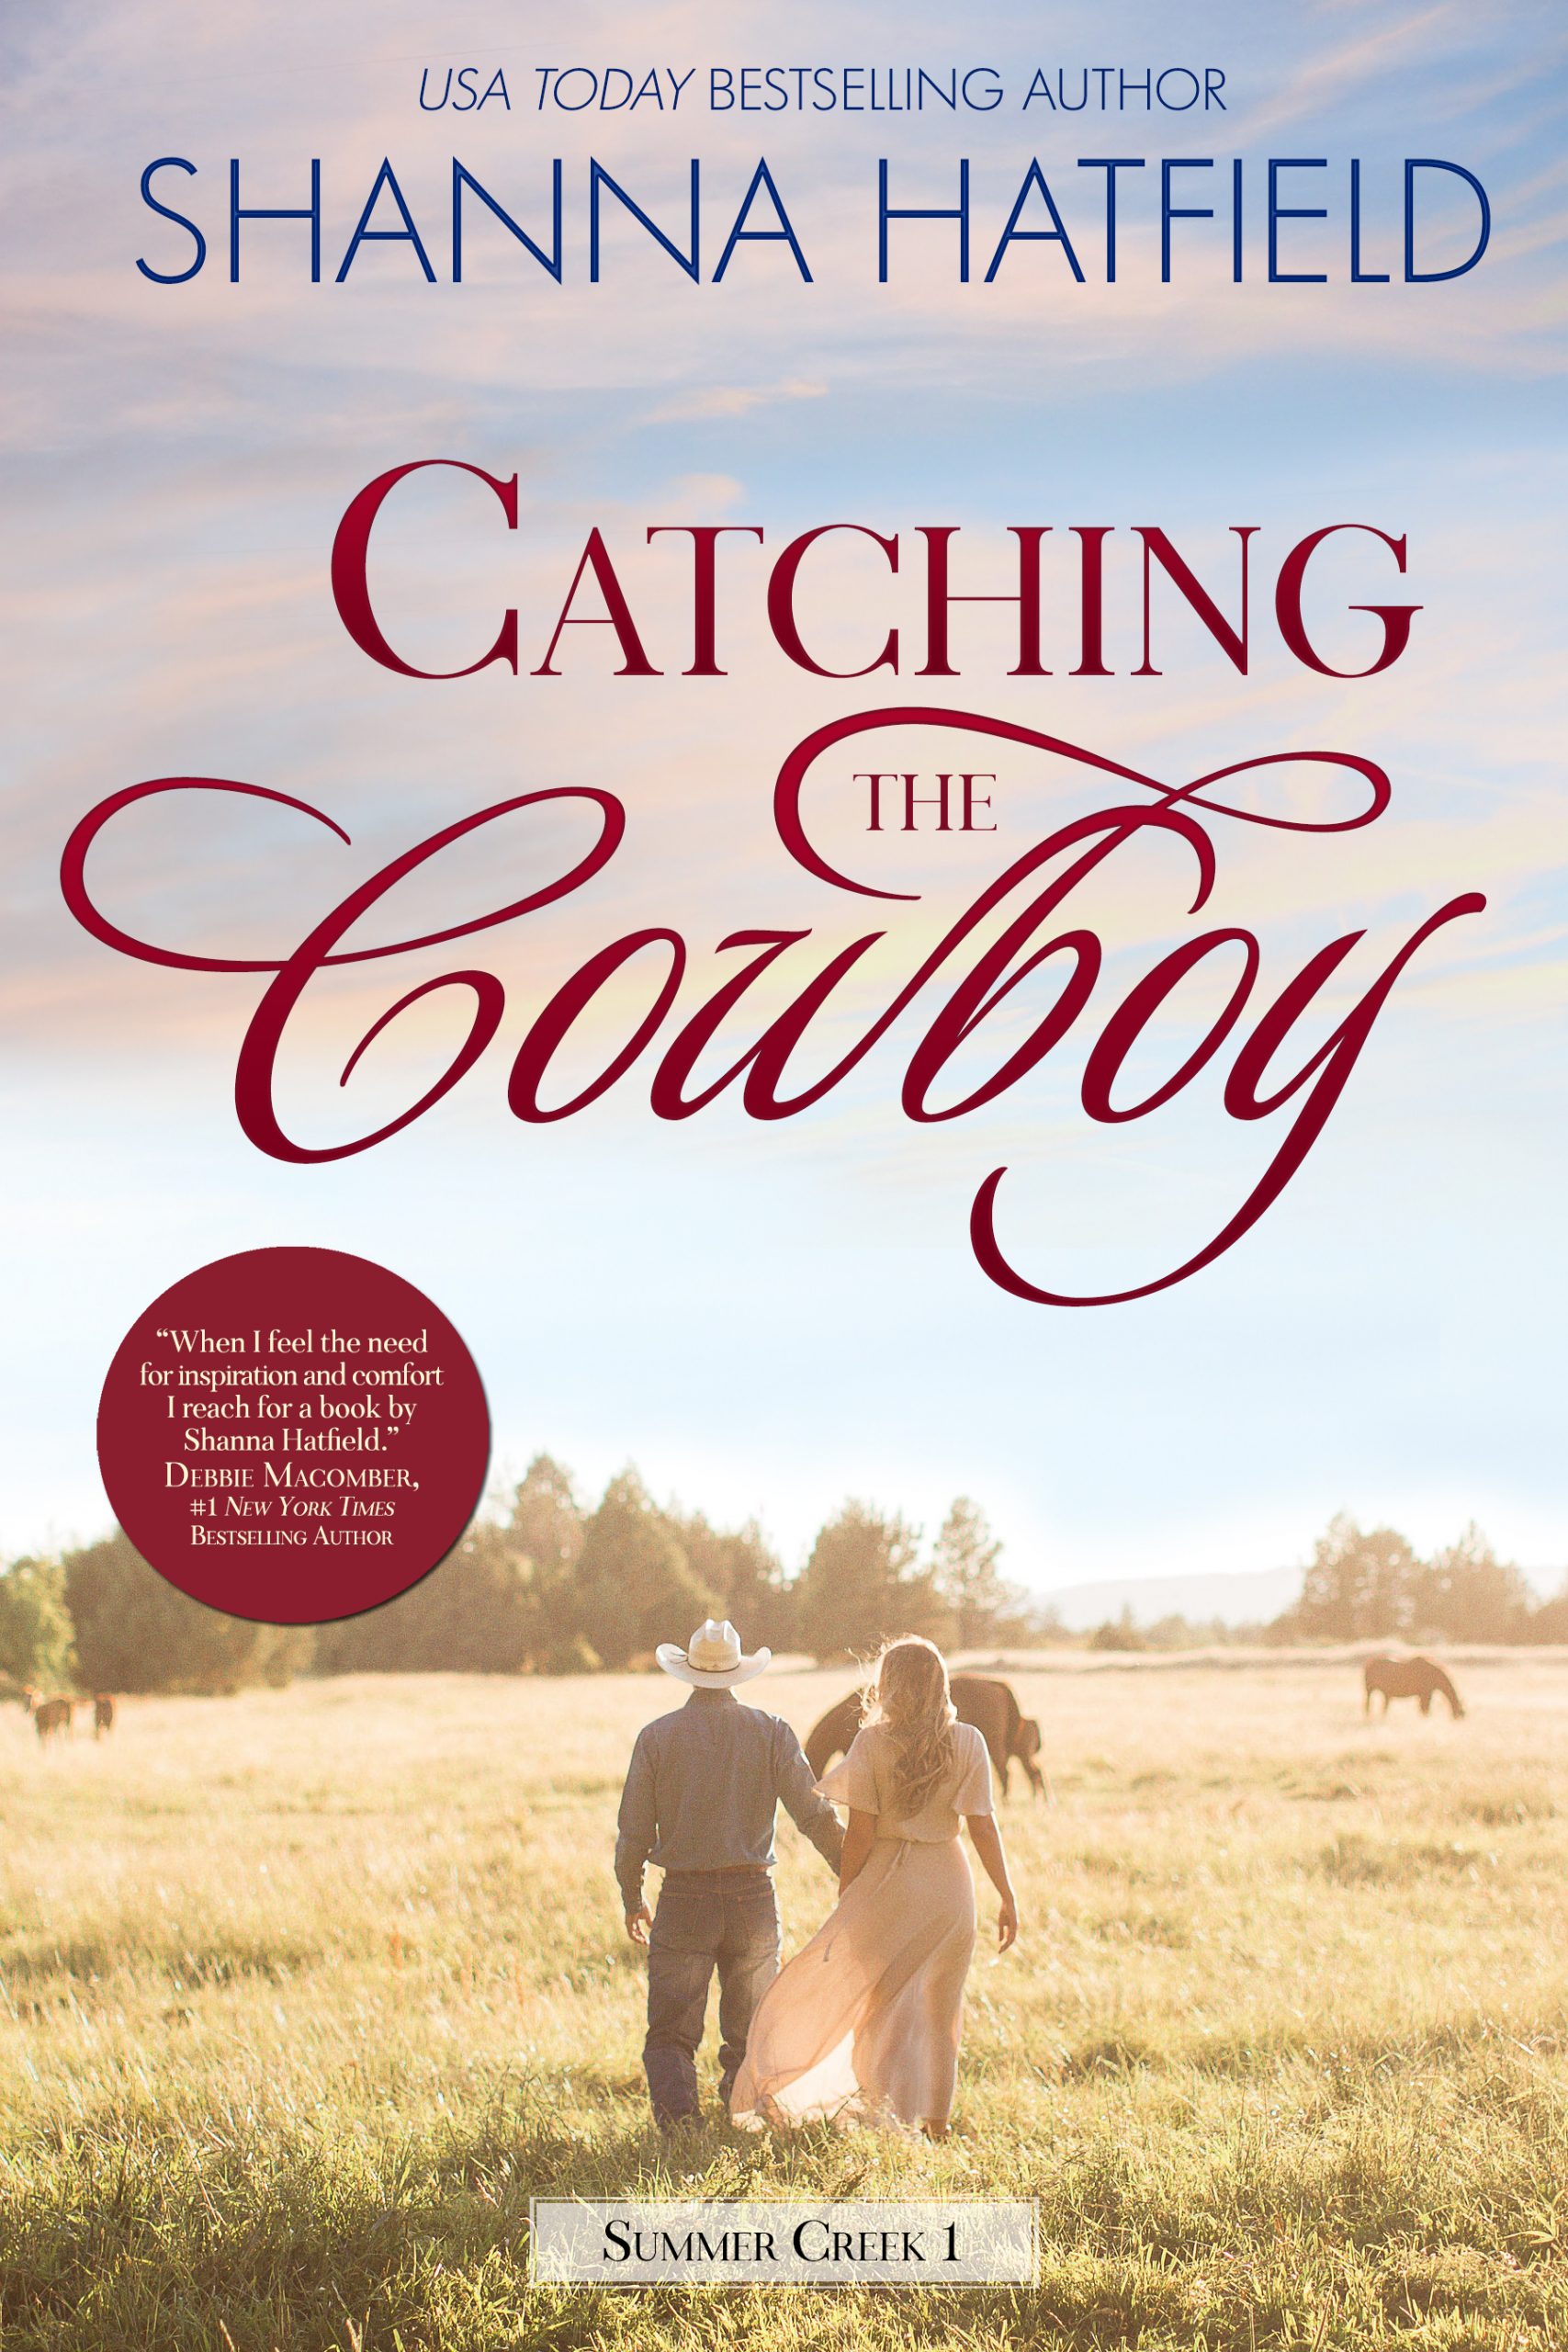 Catching-the-Cowboy-scaled